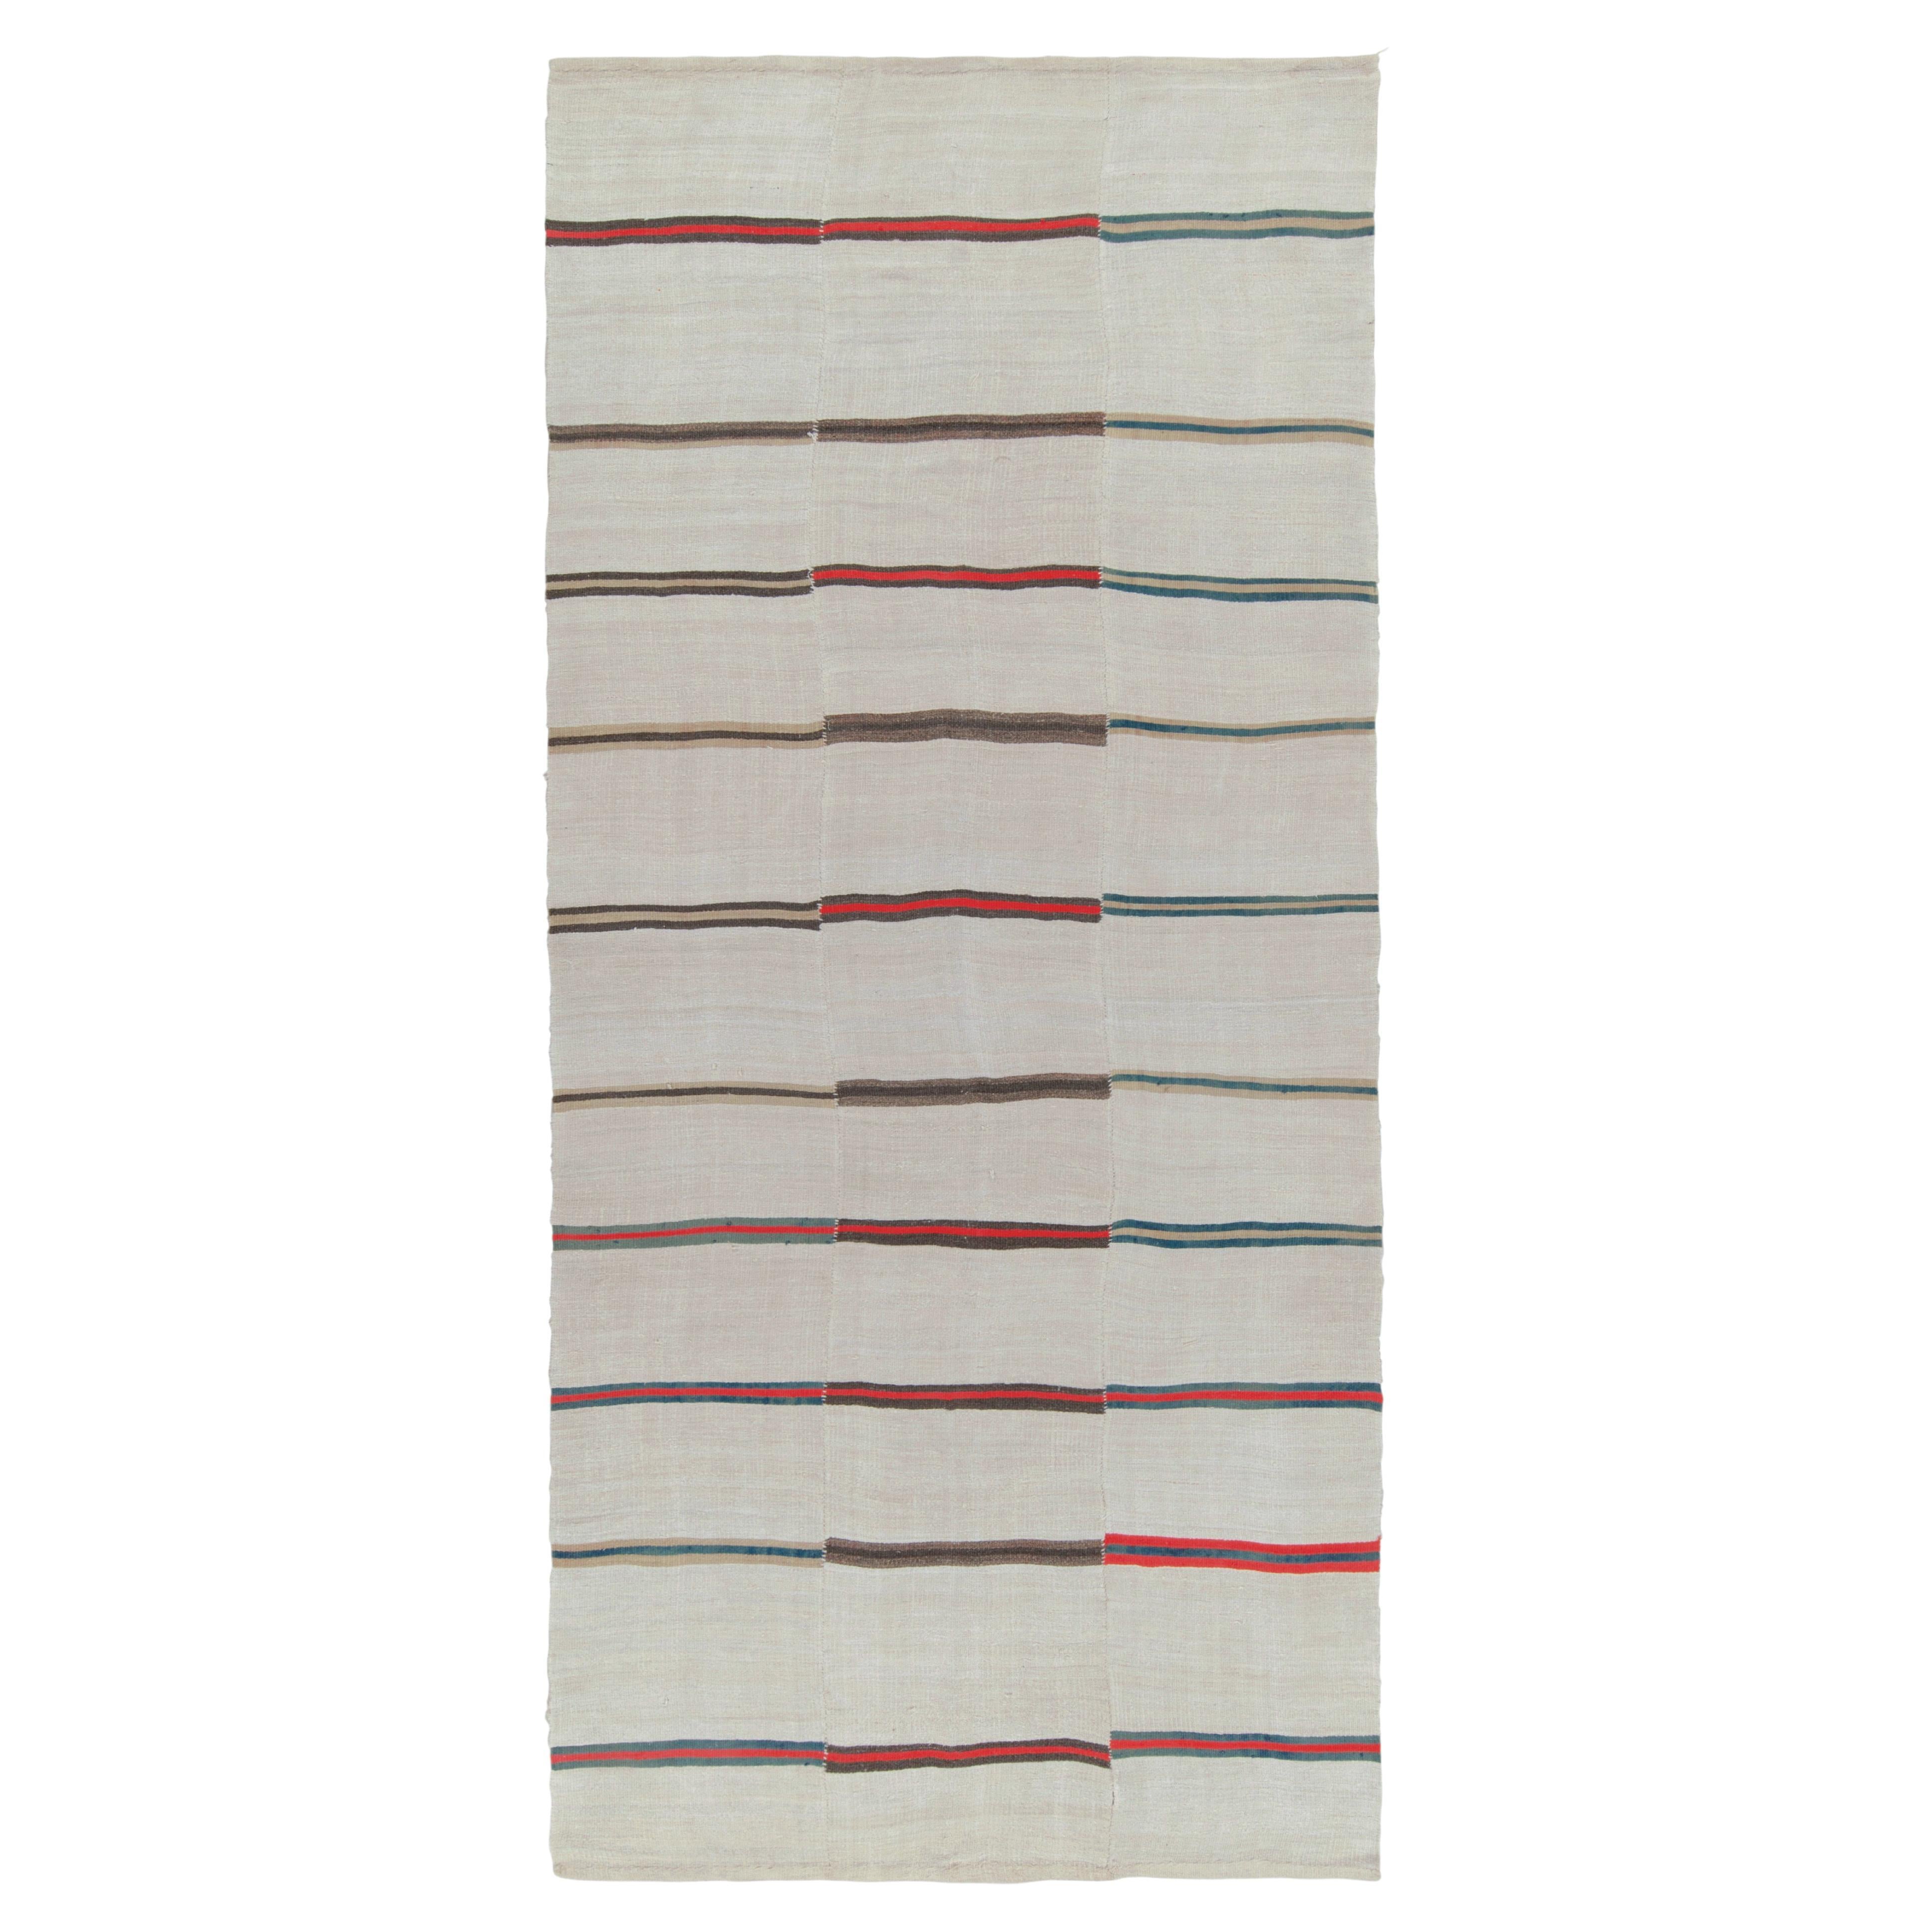 Vintage Kilim rug in Off-White, Red Stripe Patterns, Panel style by Rug & Kilim For Sale